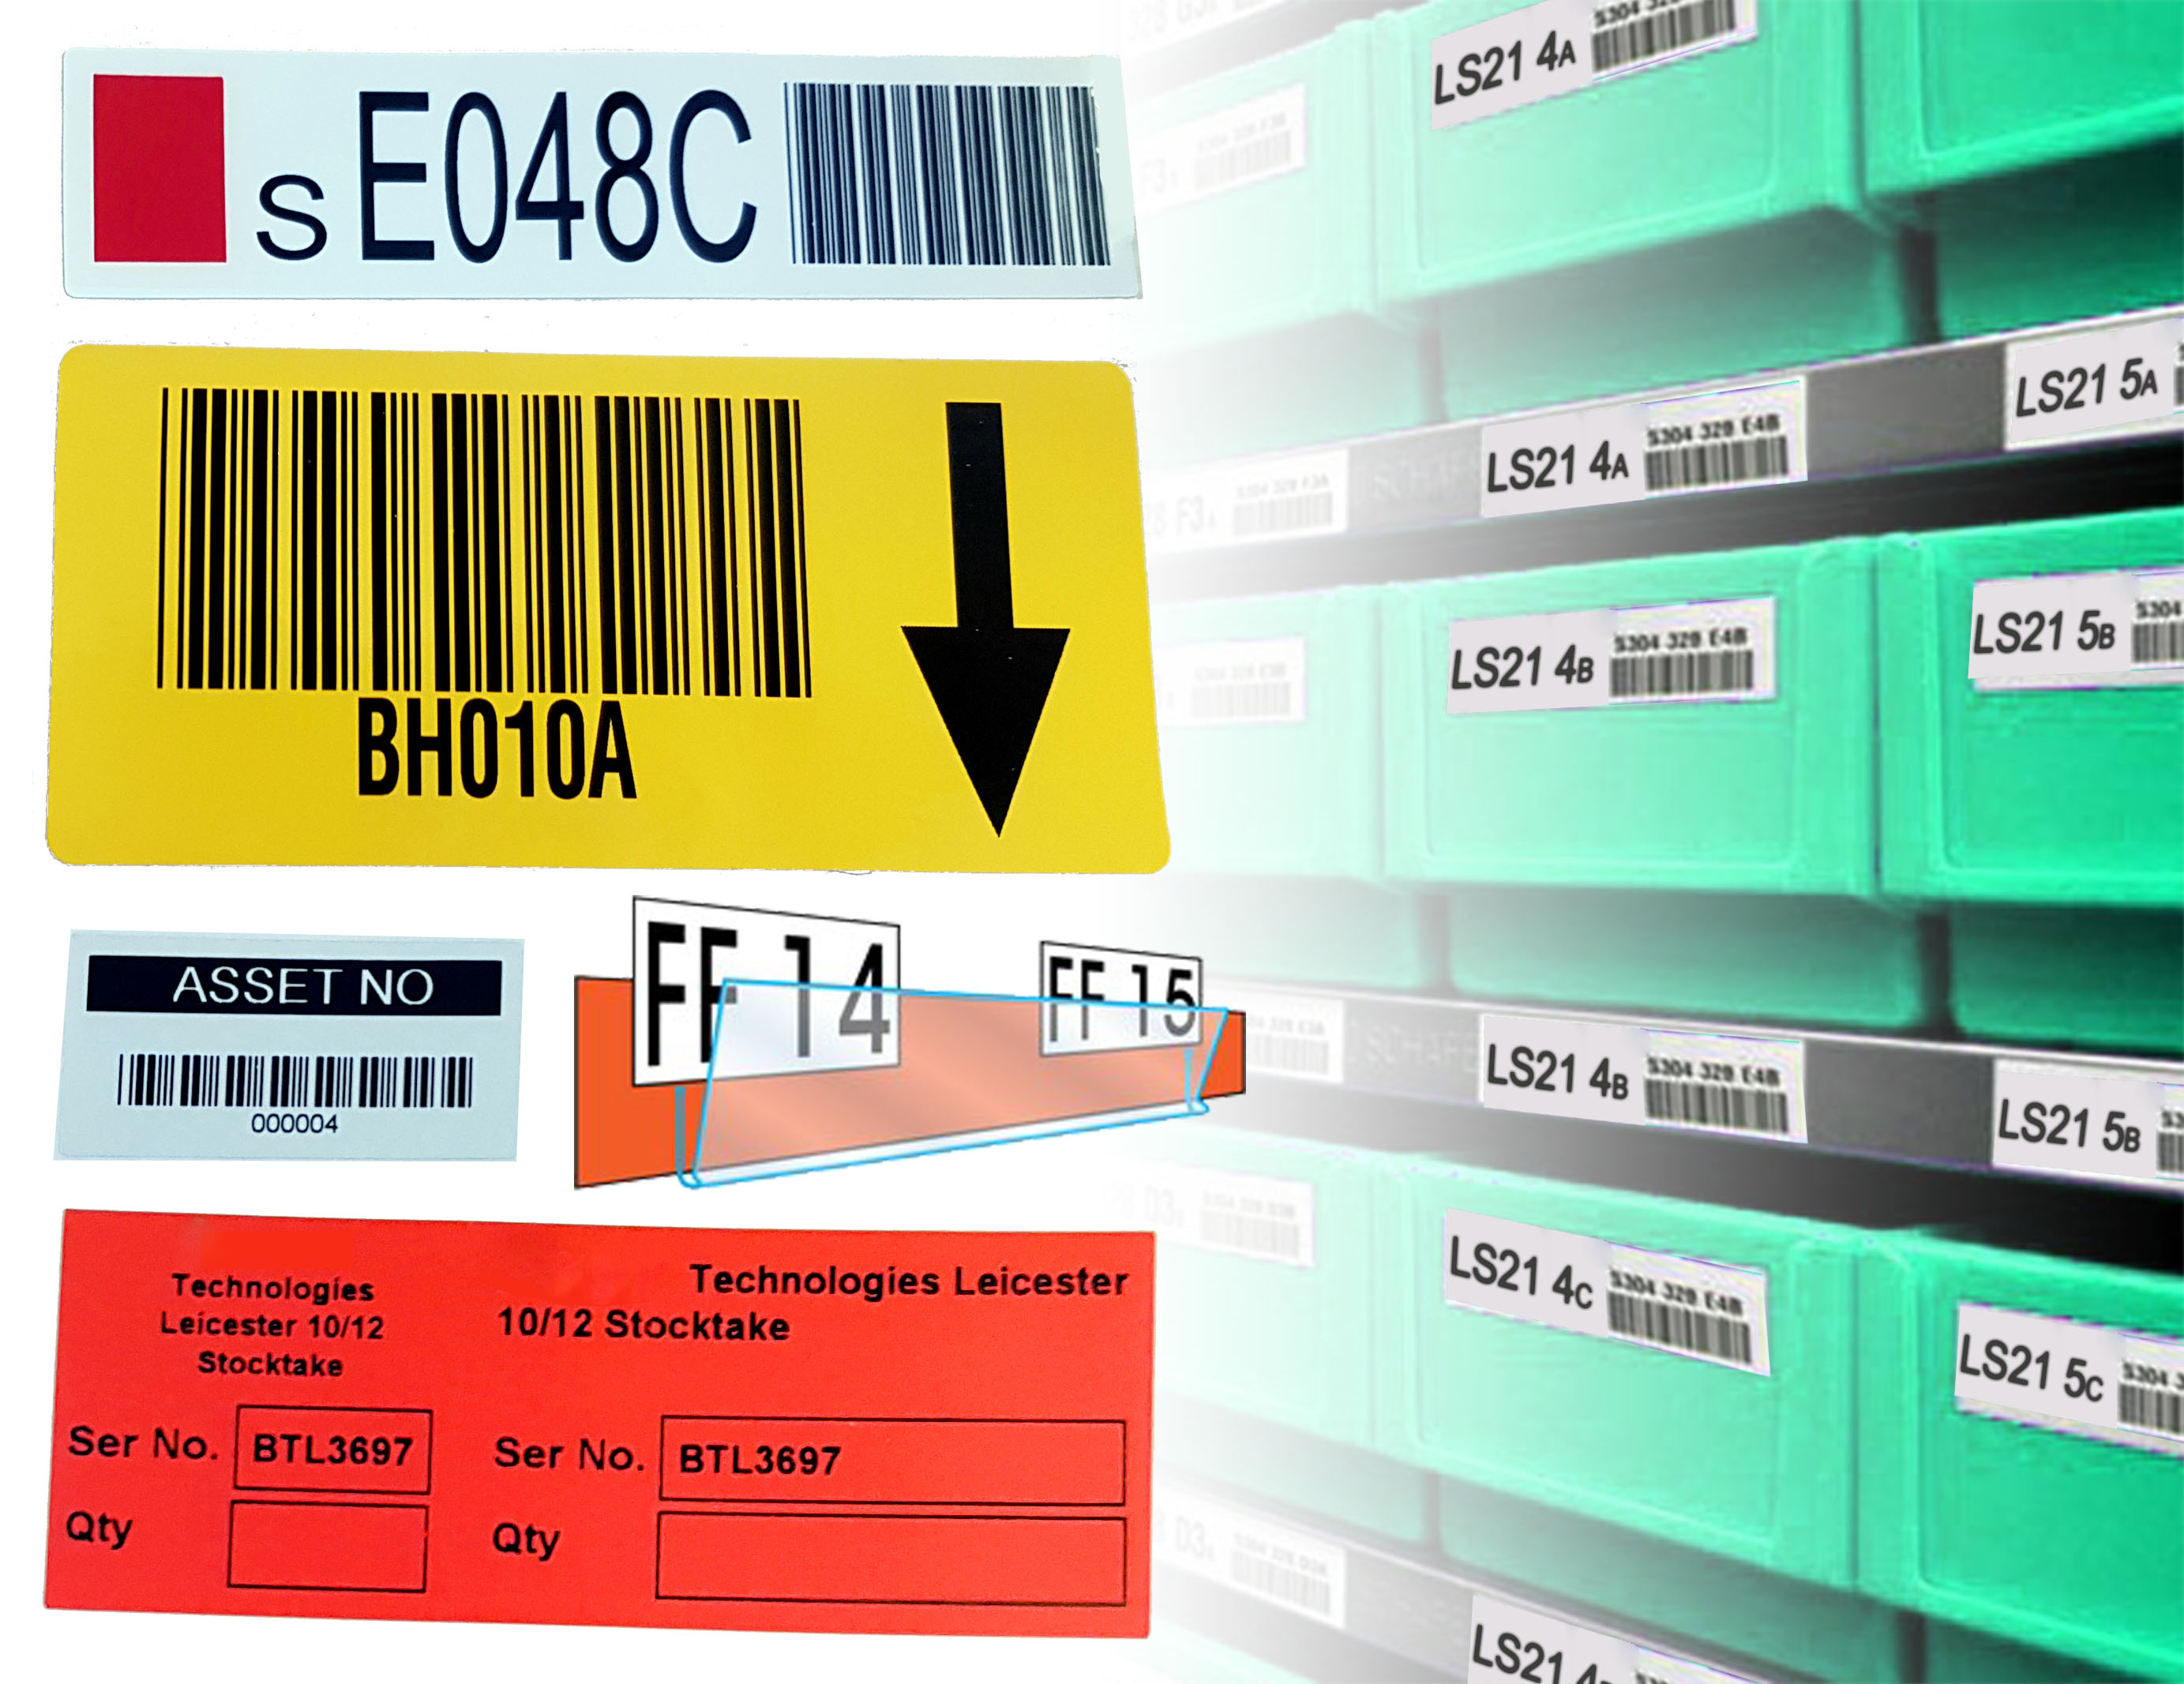 Image of a variety of asset tag labels for stock control